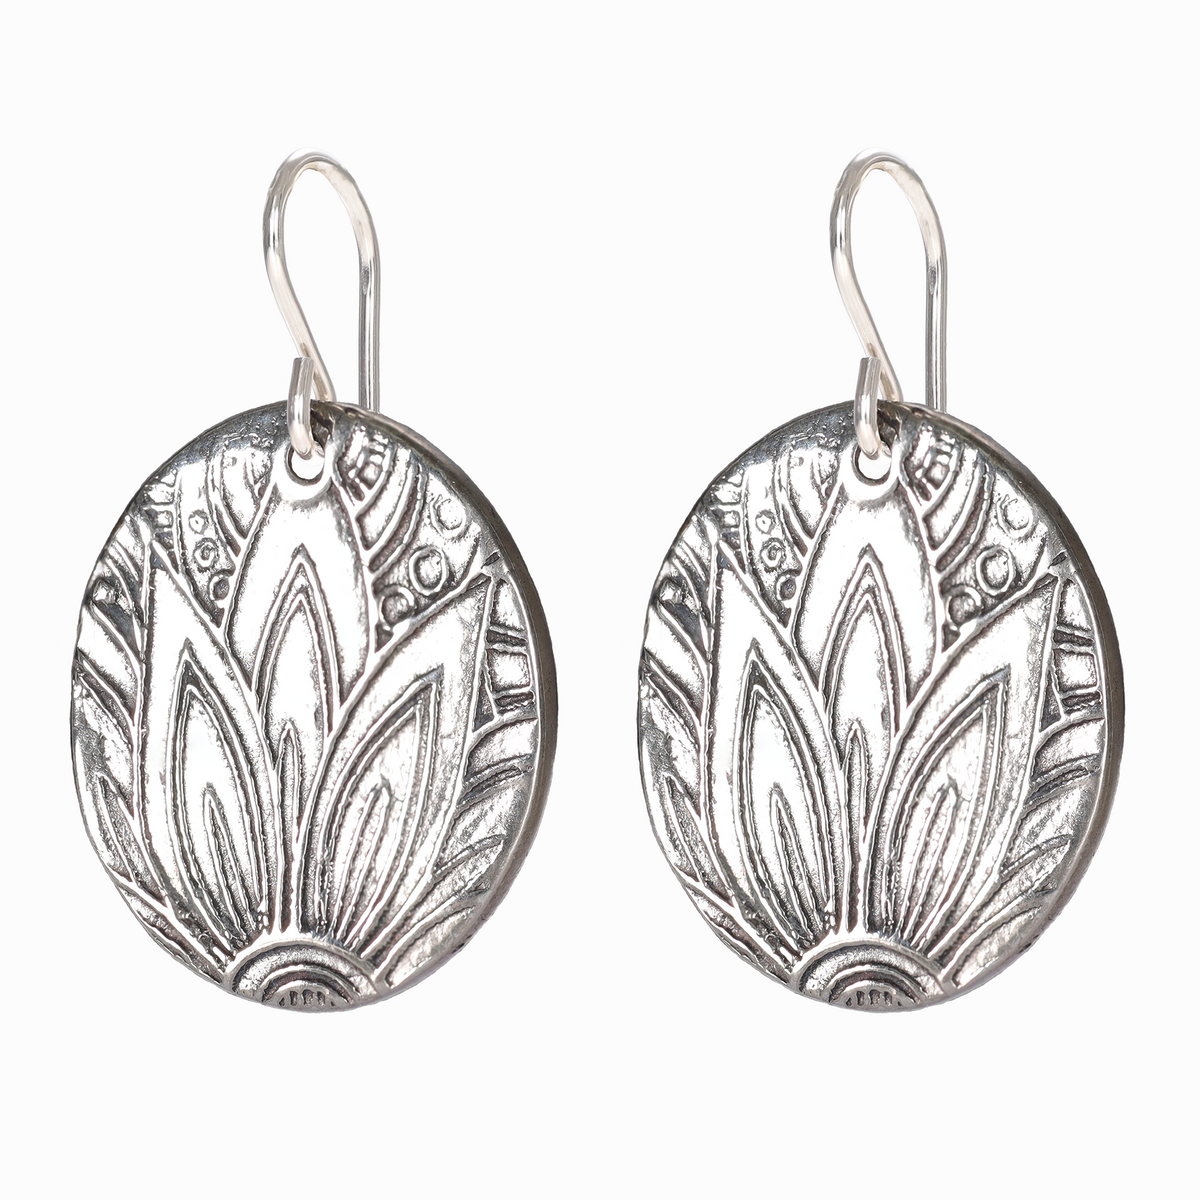 Agave Textured Large Sterling Silver Earrings on Short Ear Wires